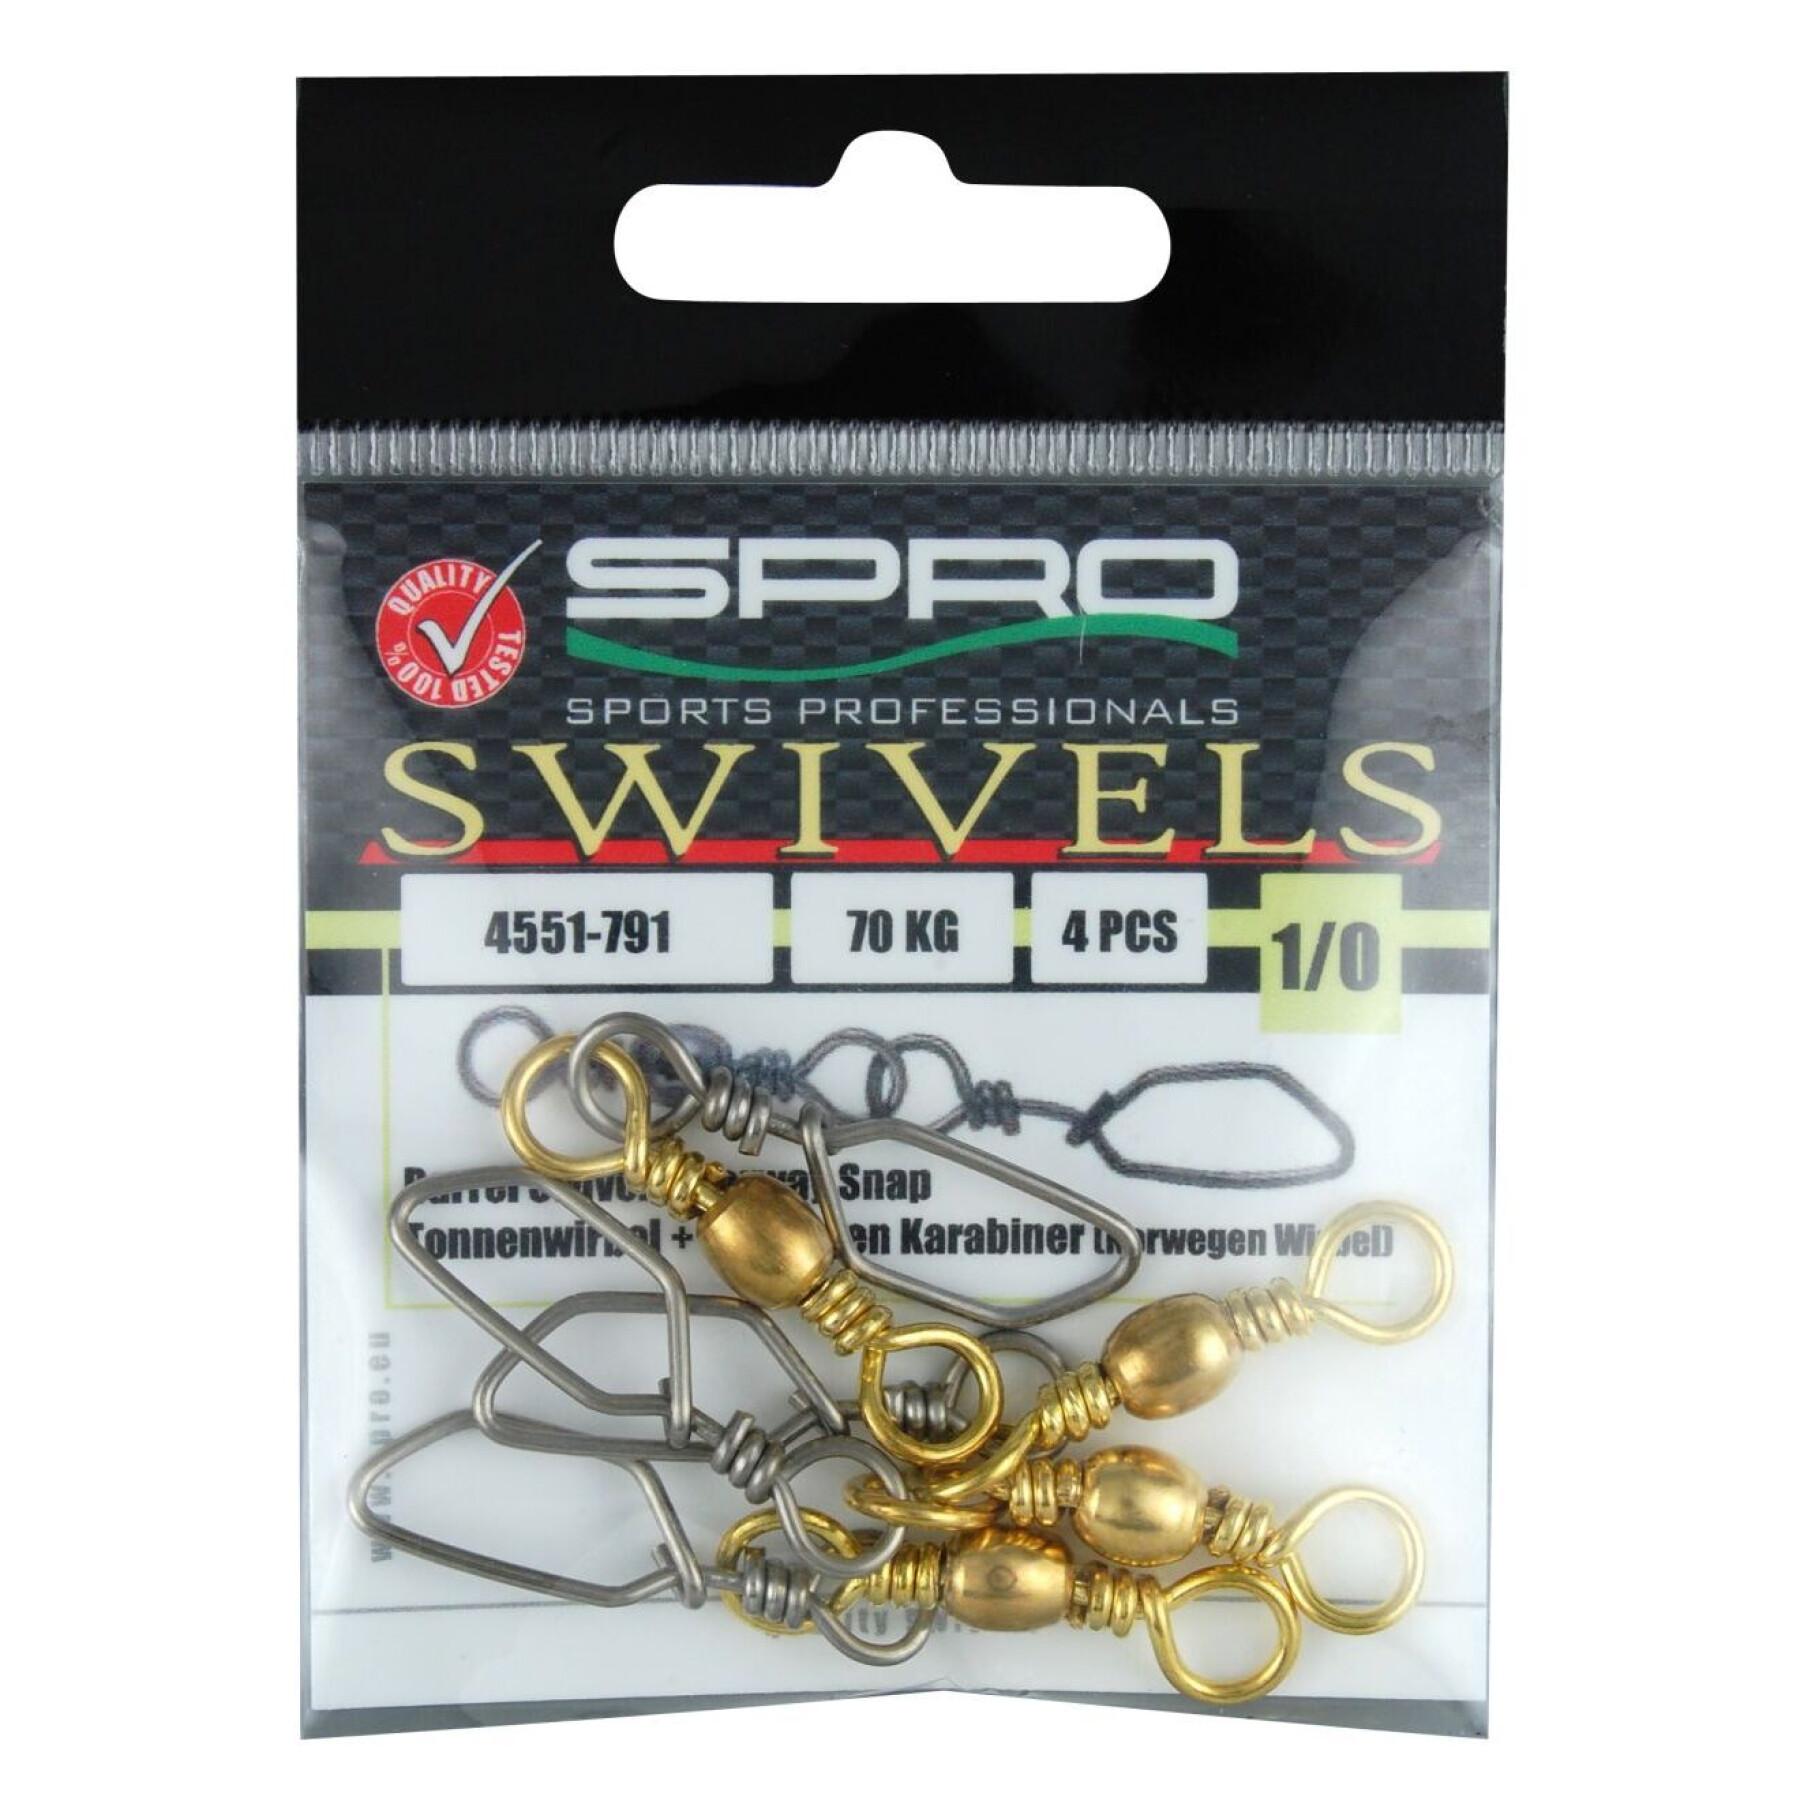 Set of 4 swivels Spro Norway Snap